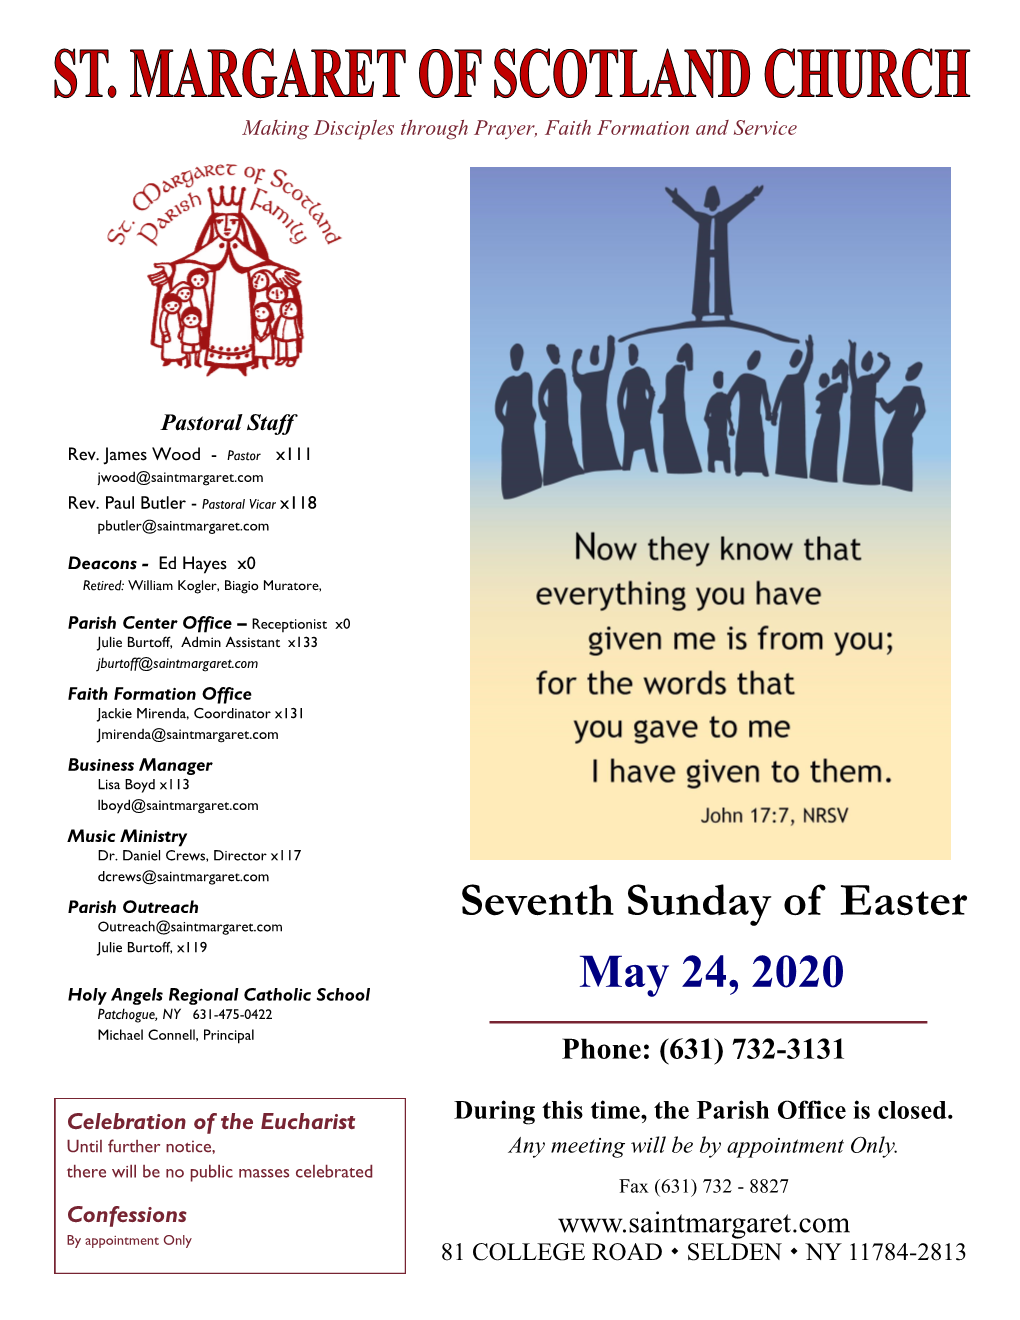 May 24, 2020 Seventh Sunday of Easter